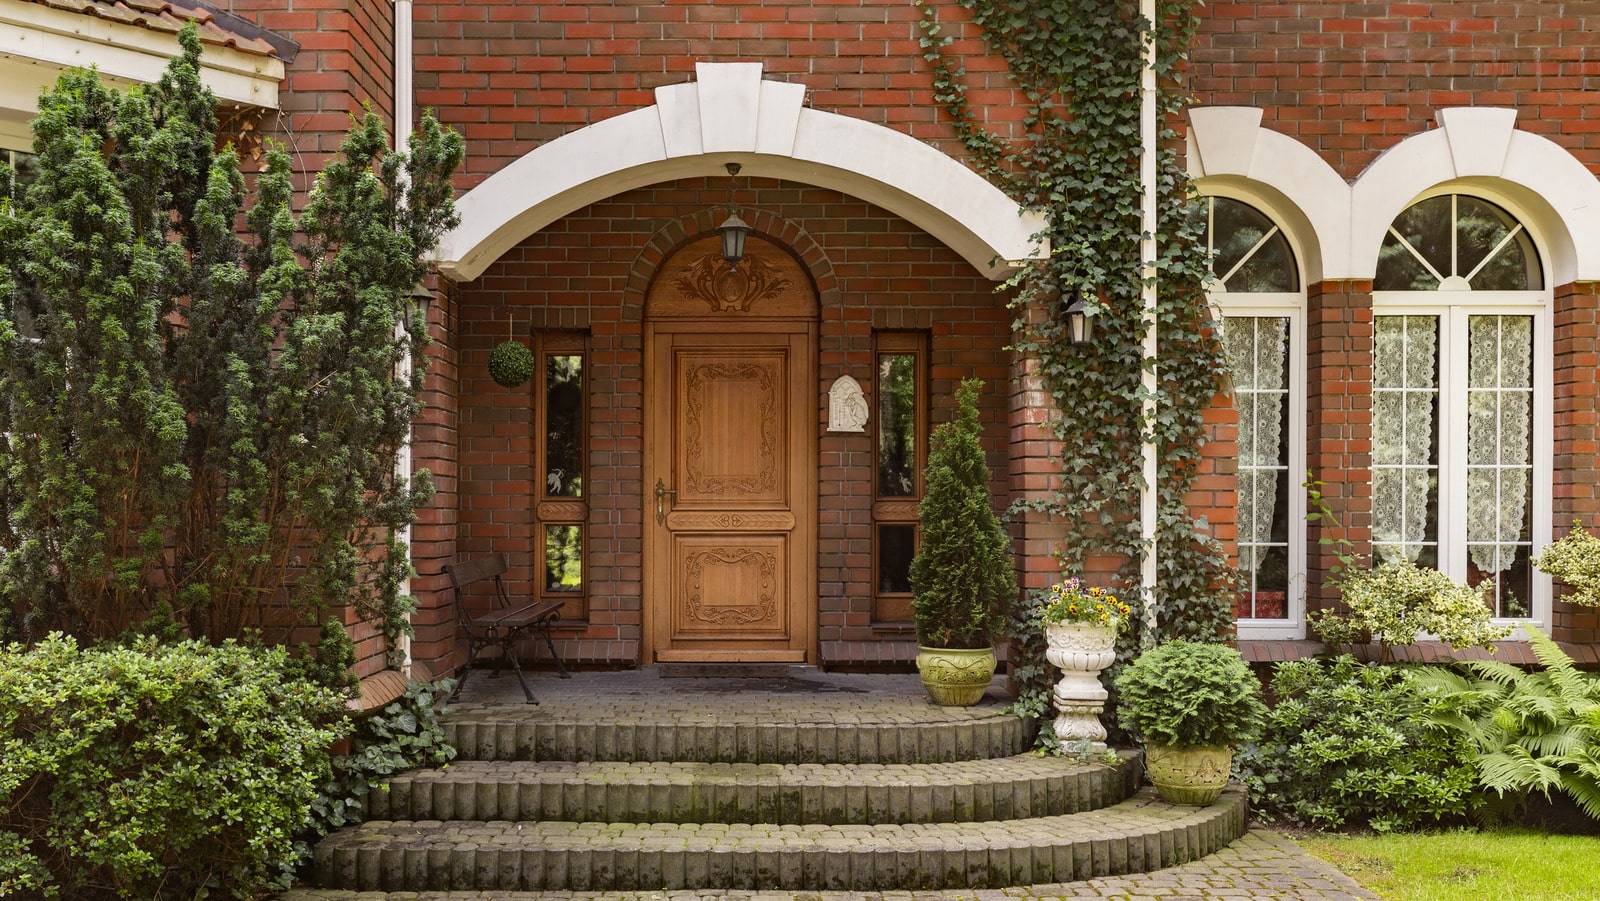 Plants, bushes and trees in front of wooden door of red brick mansion with windows